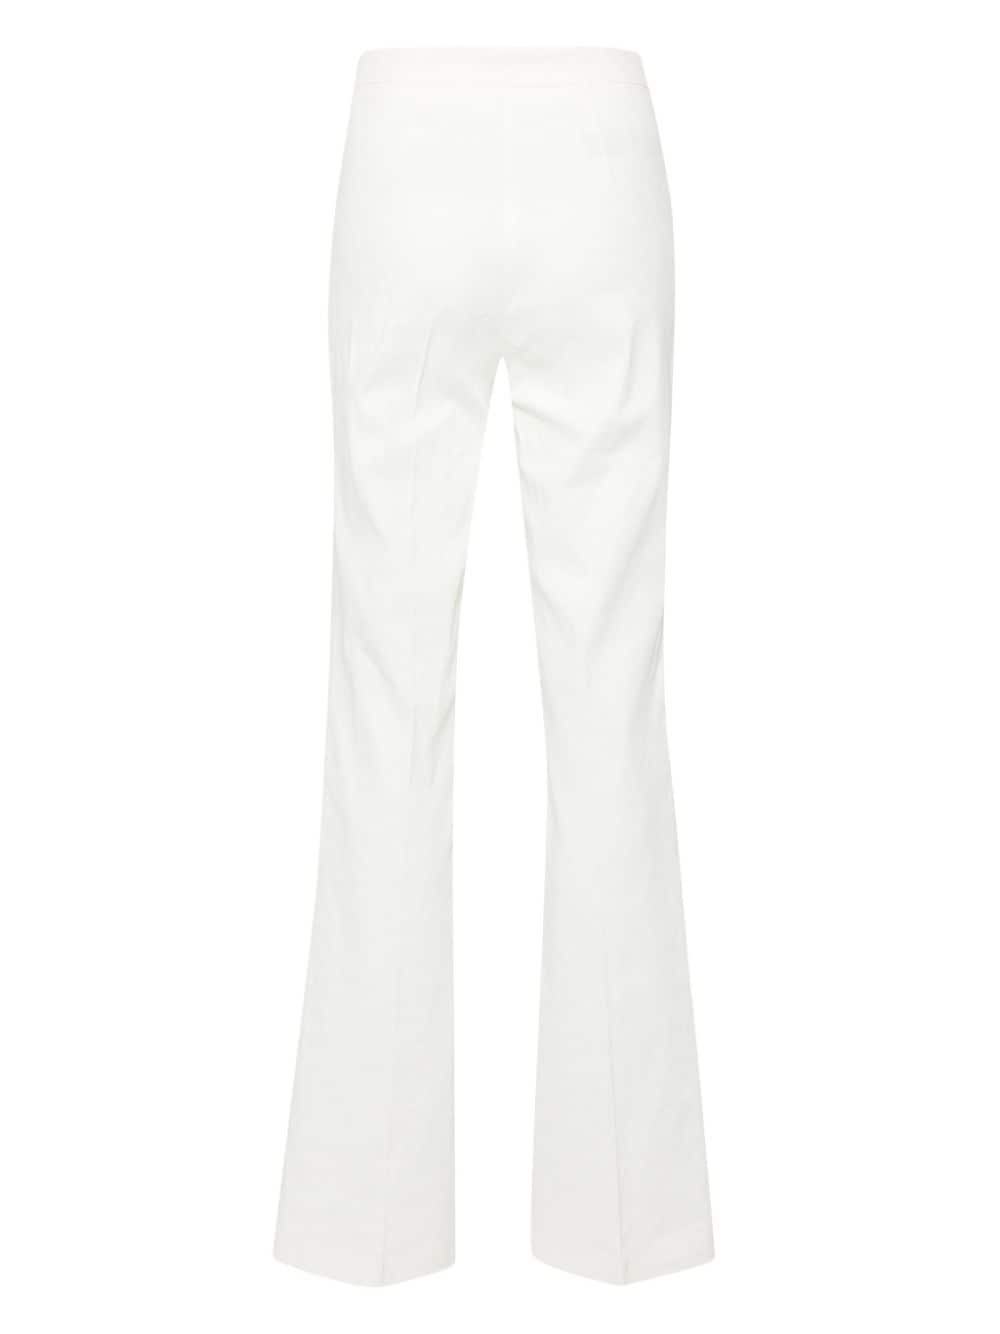 High-waisted linen-blend trousers<BR/><BR/><BR/>